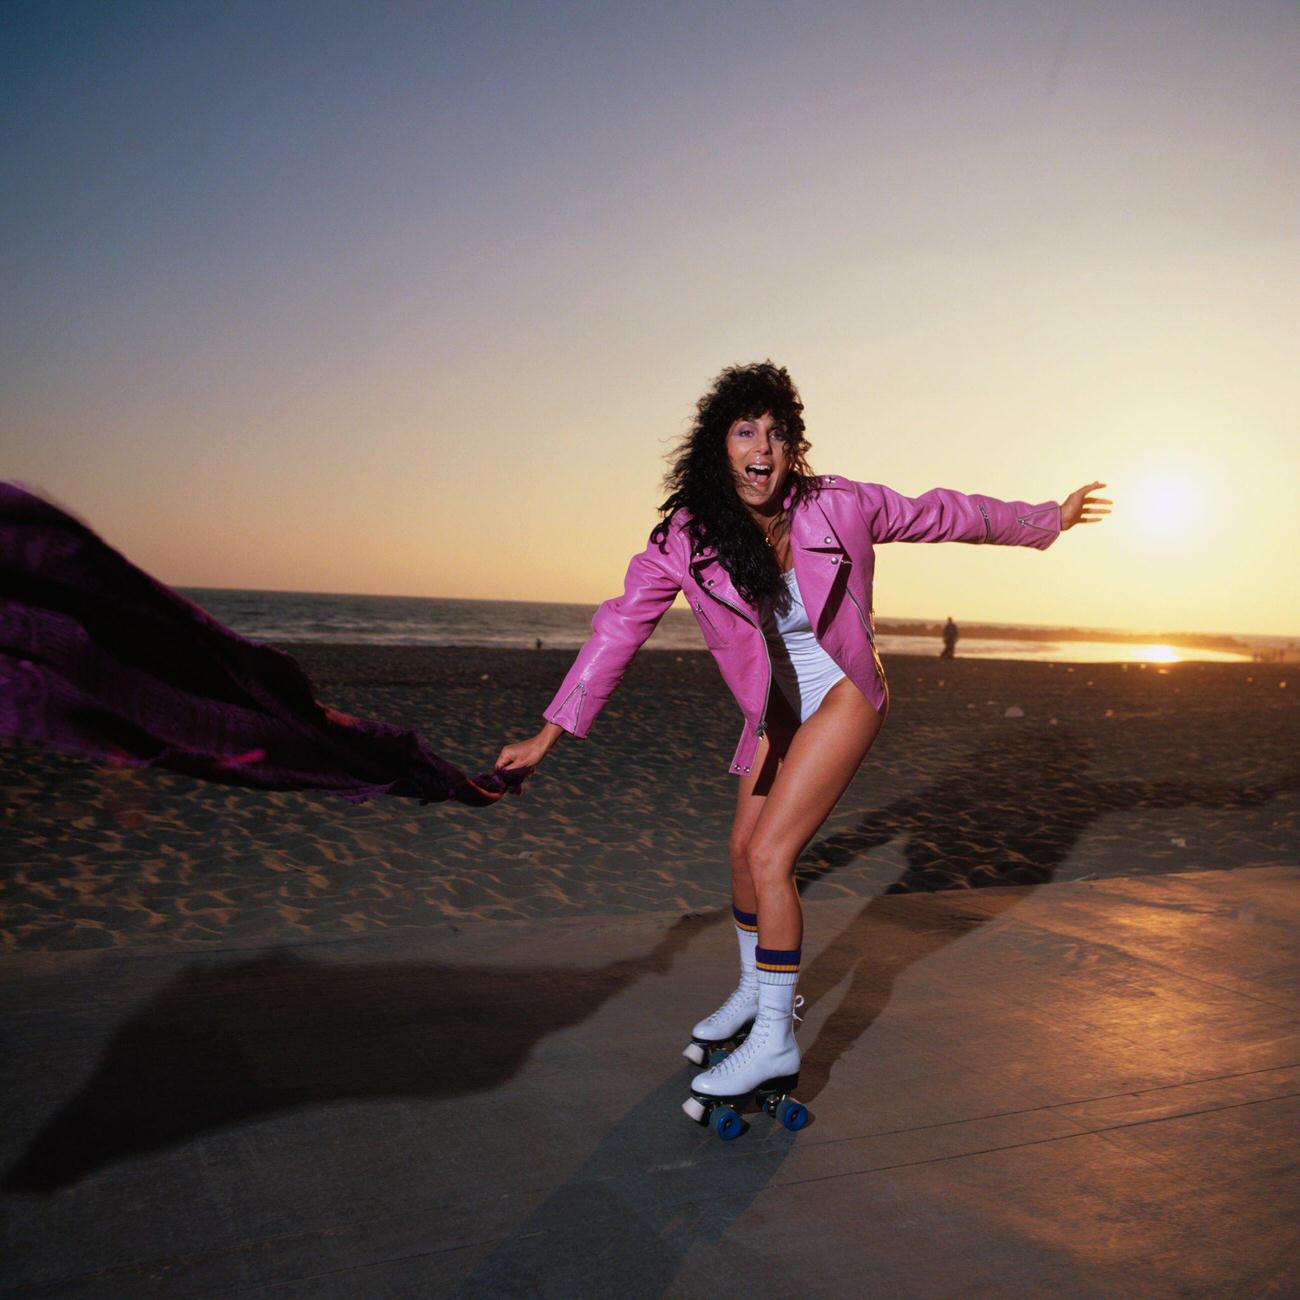 Cher Roller Skating at Venice Beach in Pink Leather Jacket, California